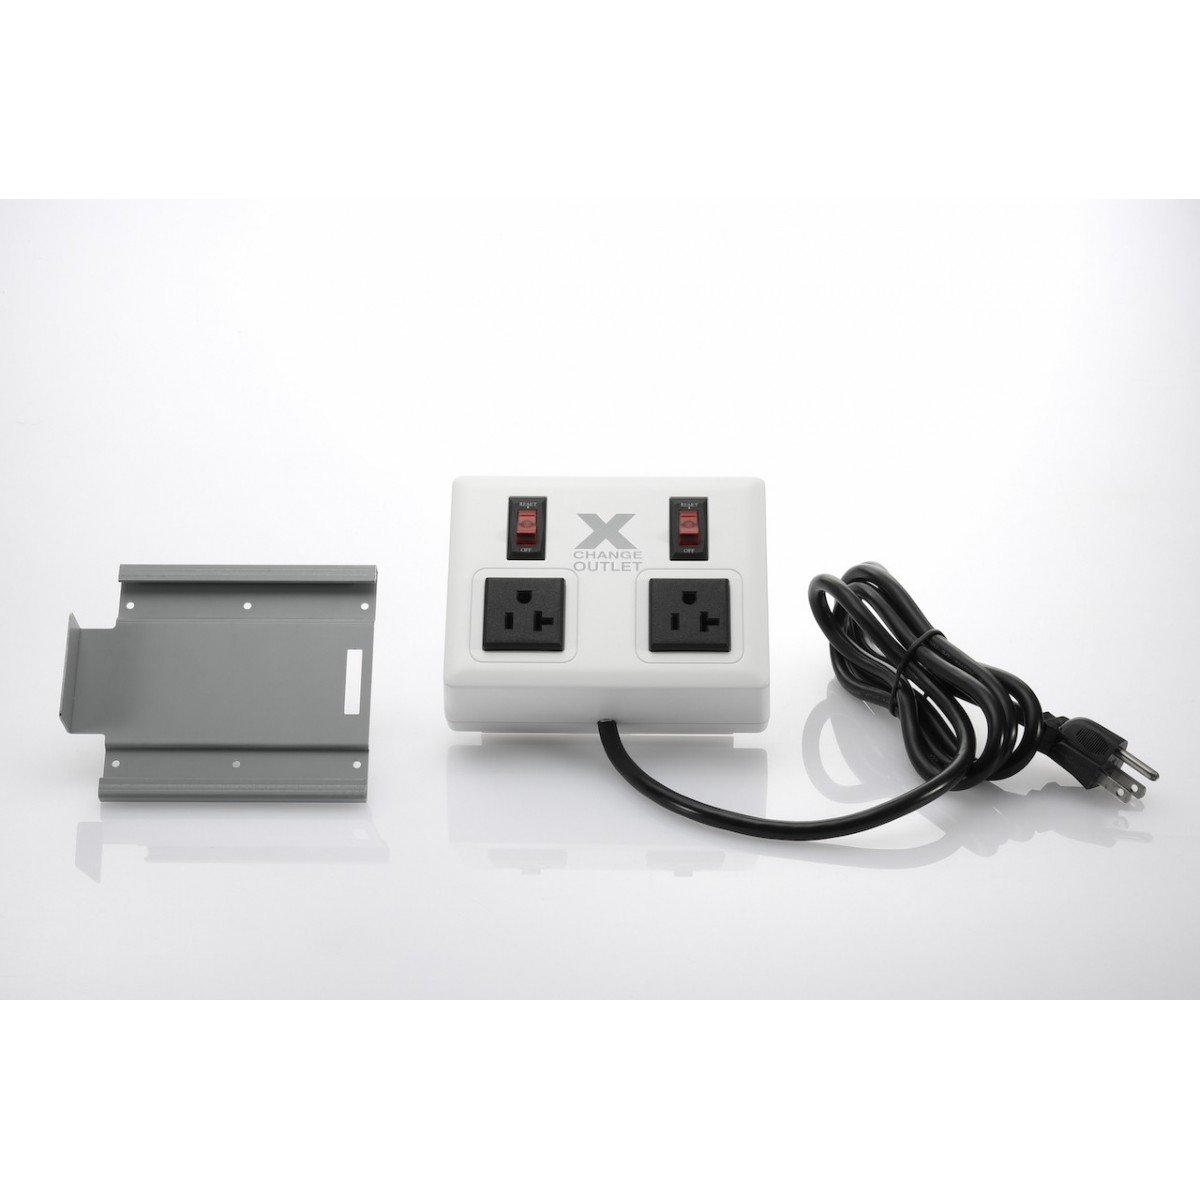 https://www.powerxchanger.com/store/161-thickbox_default/wall-mount-extension-outlet.jpg